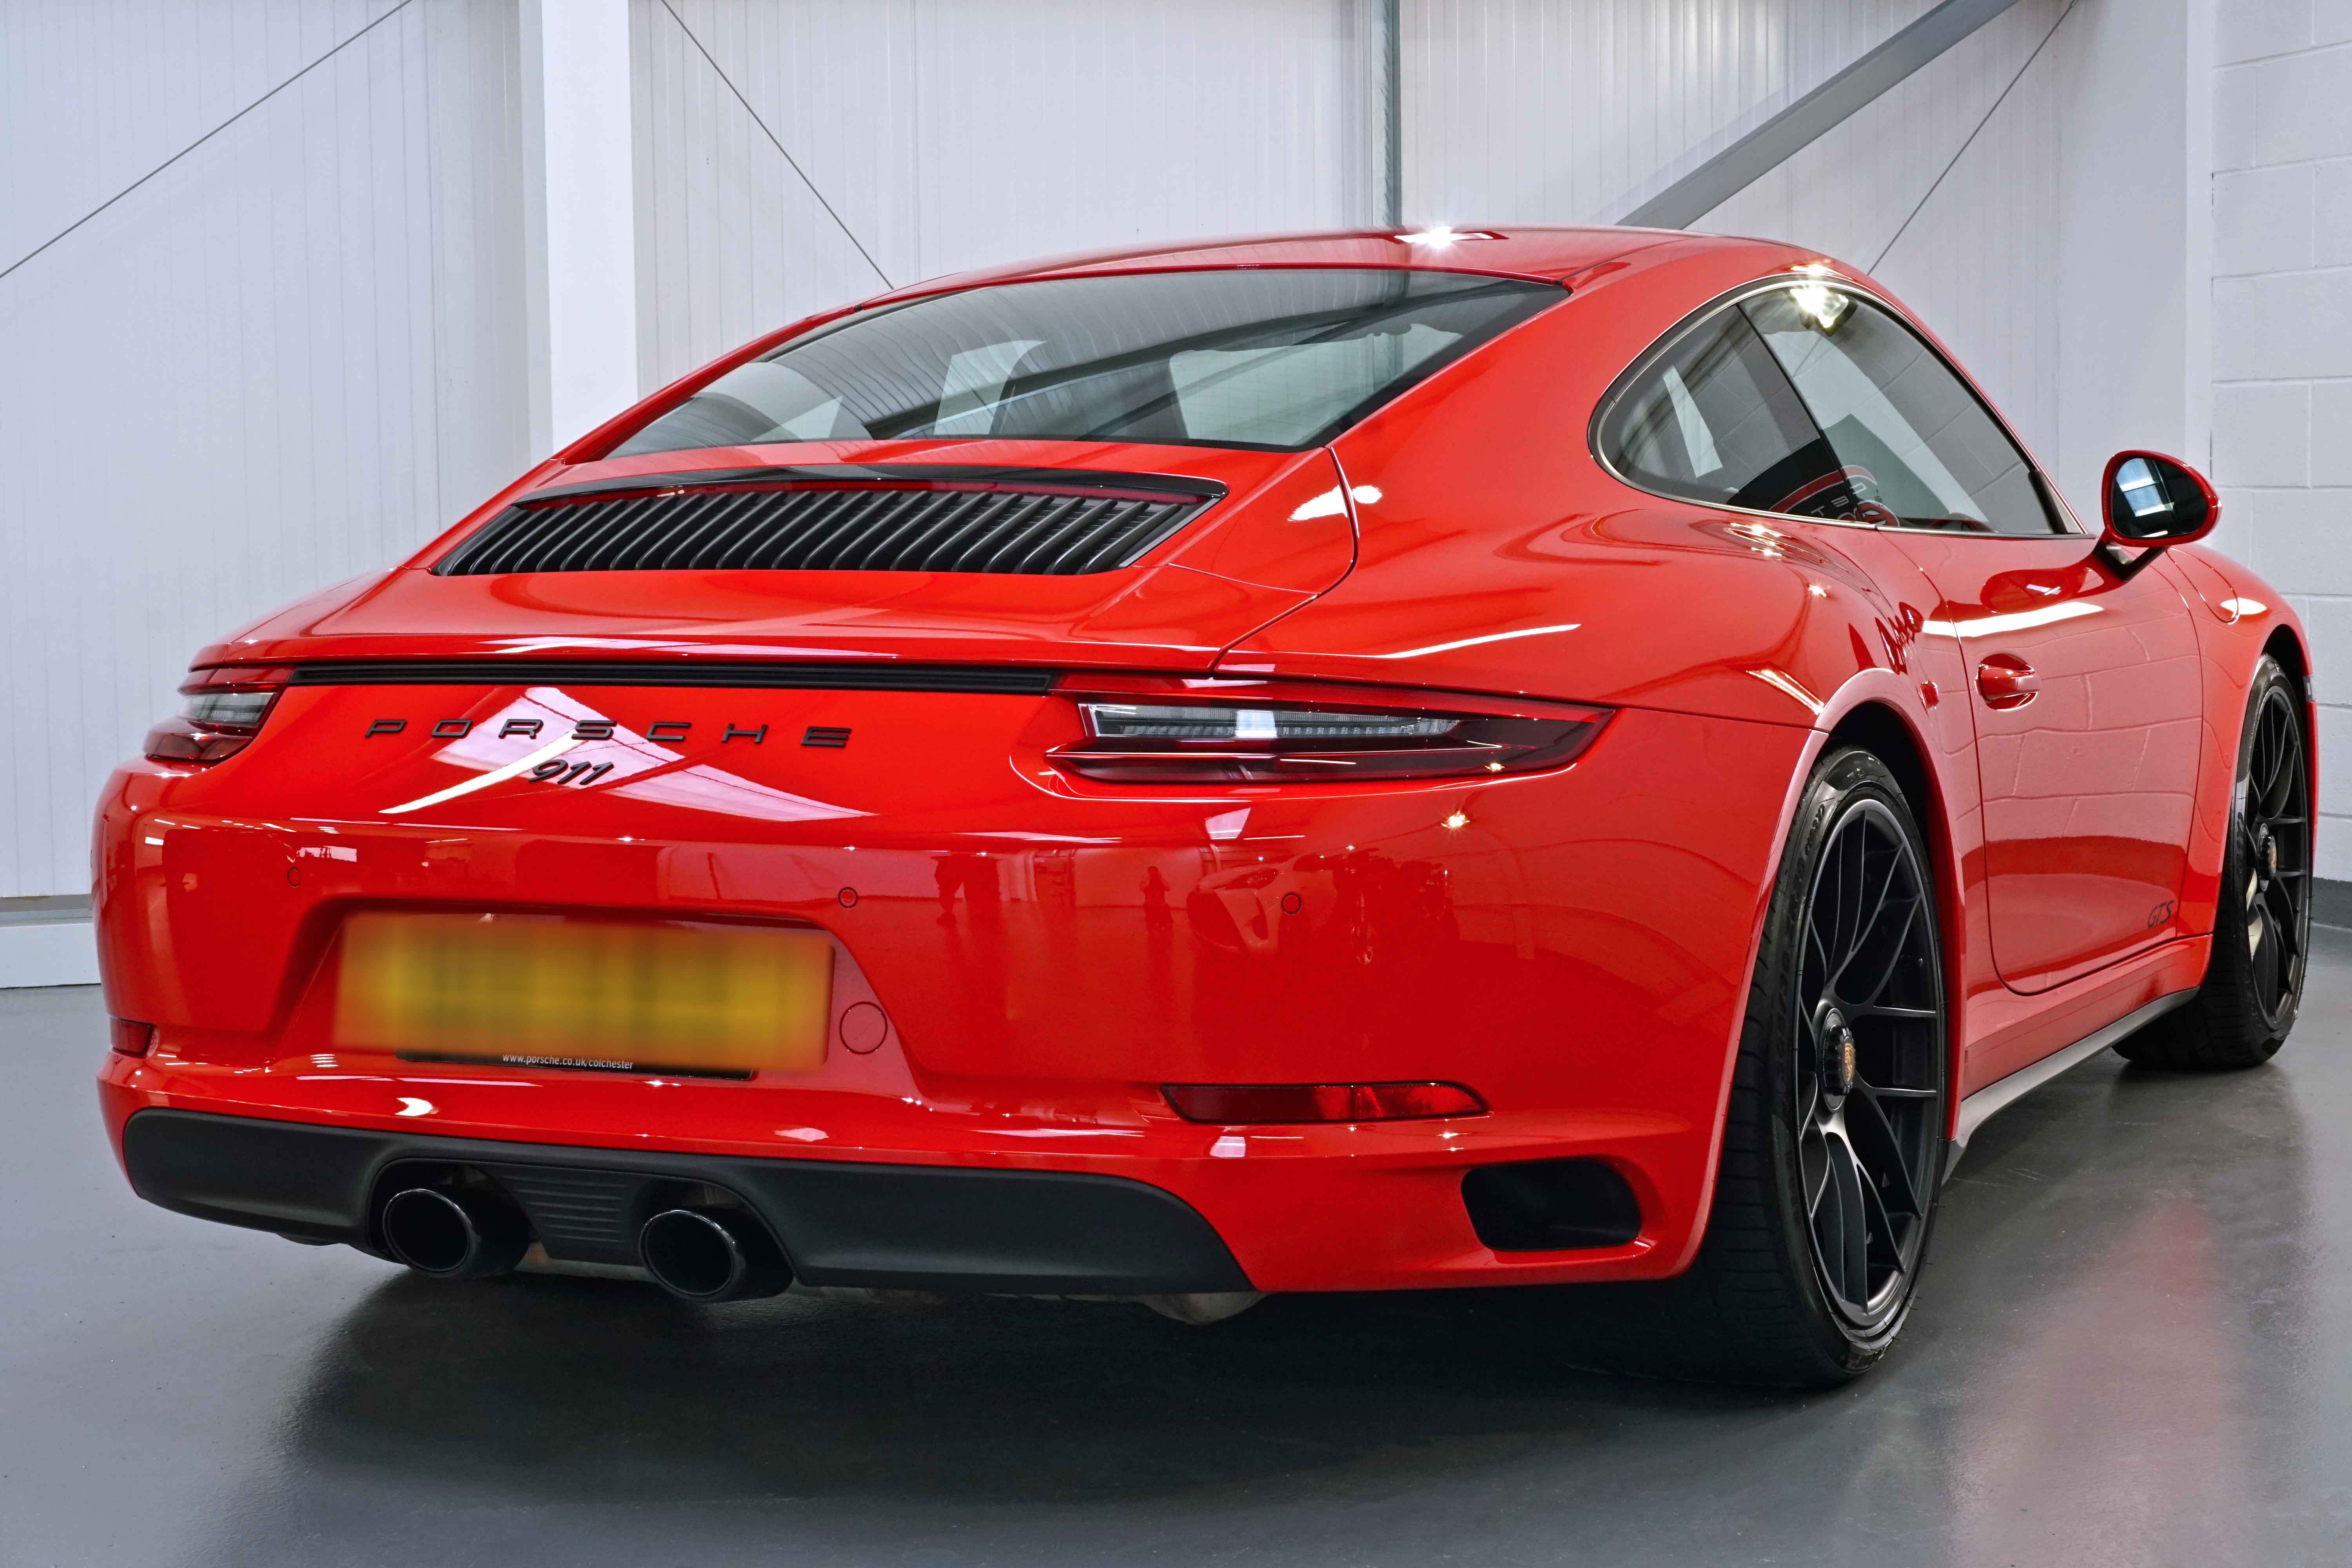 PORSCHE 911 GTS New Car Enhancement and Protection Detail with Gtechniq Crystal Serum Ultra and XPEL PPF